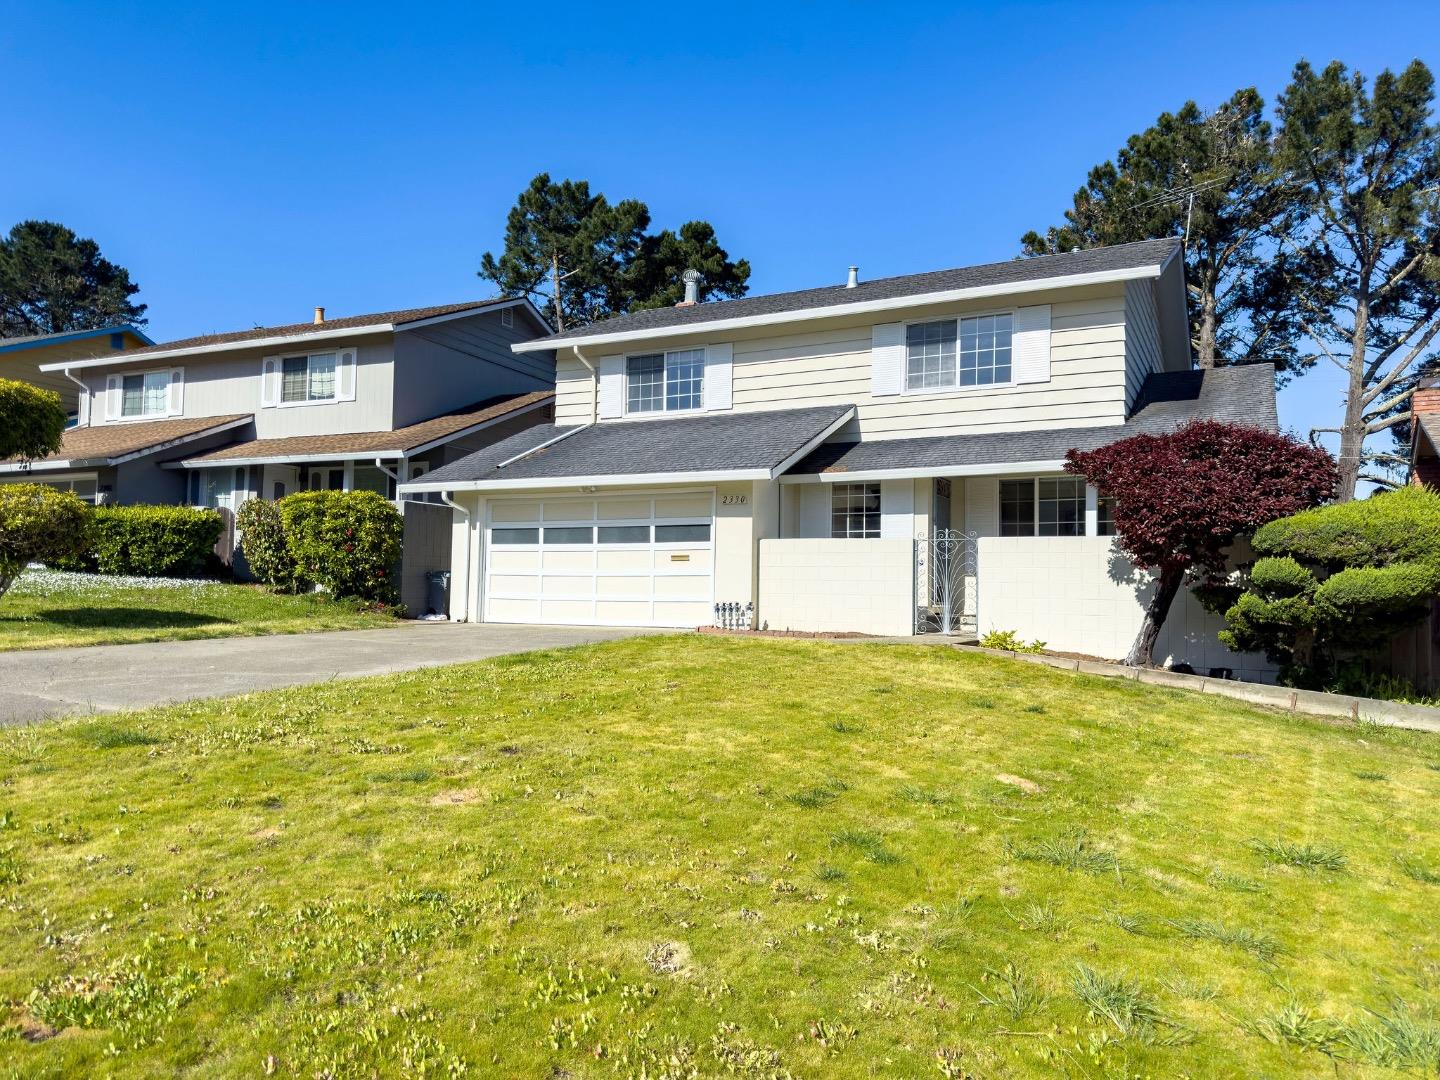 Photo of 2330 Tipperary Ave in South San Francisco, CA